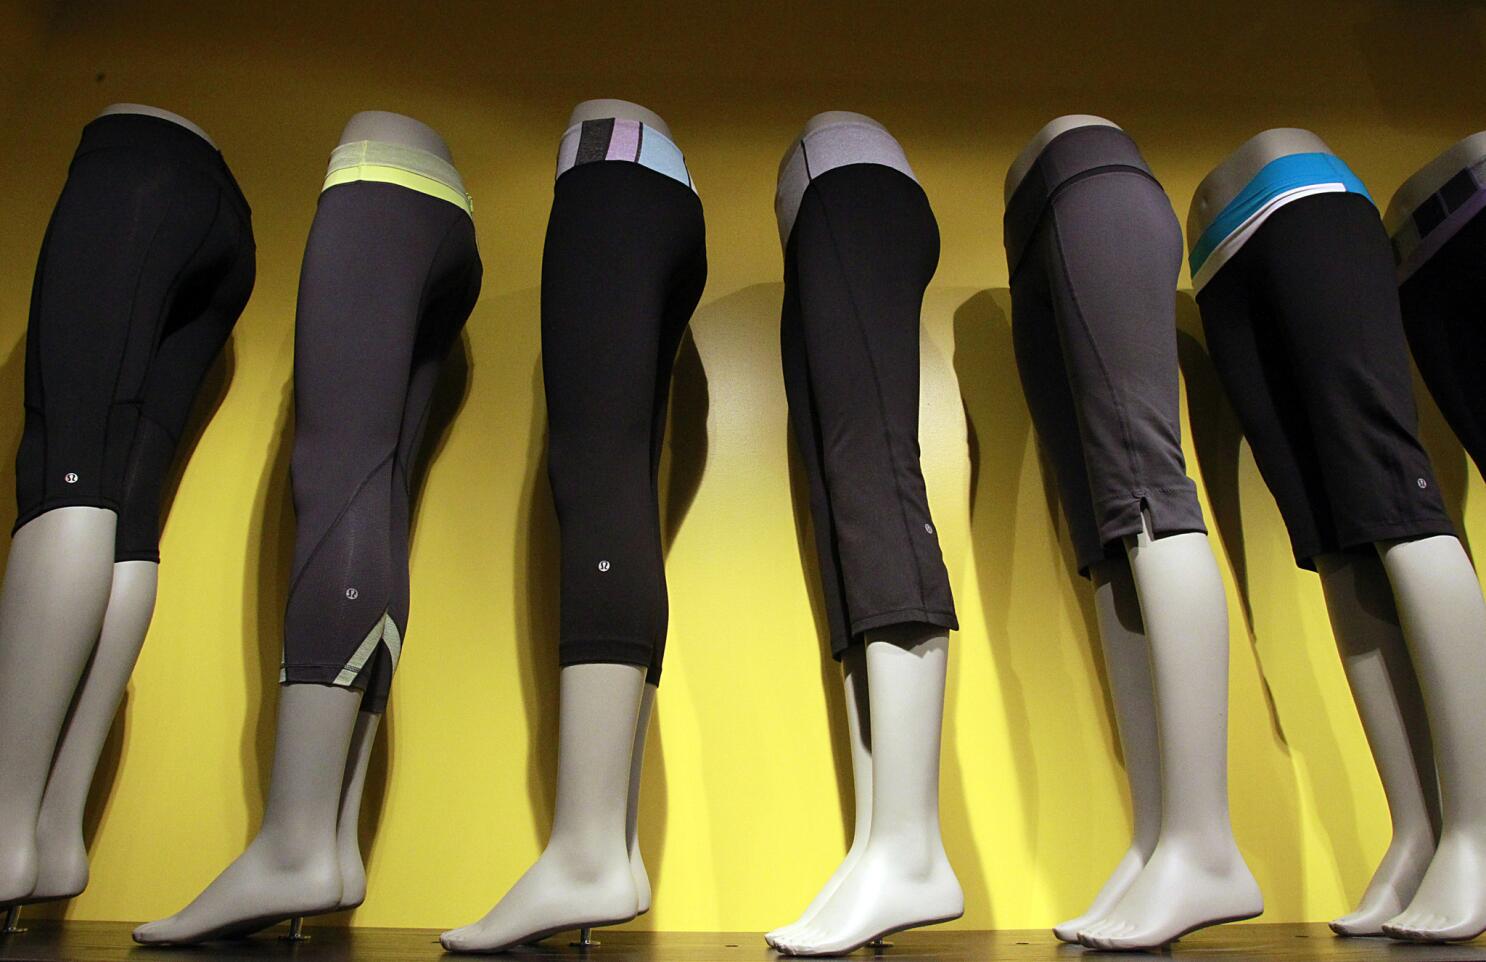 Product Chief Is Out At See-Through-Pants-Plagued Lululemon